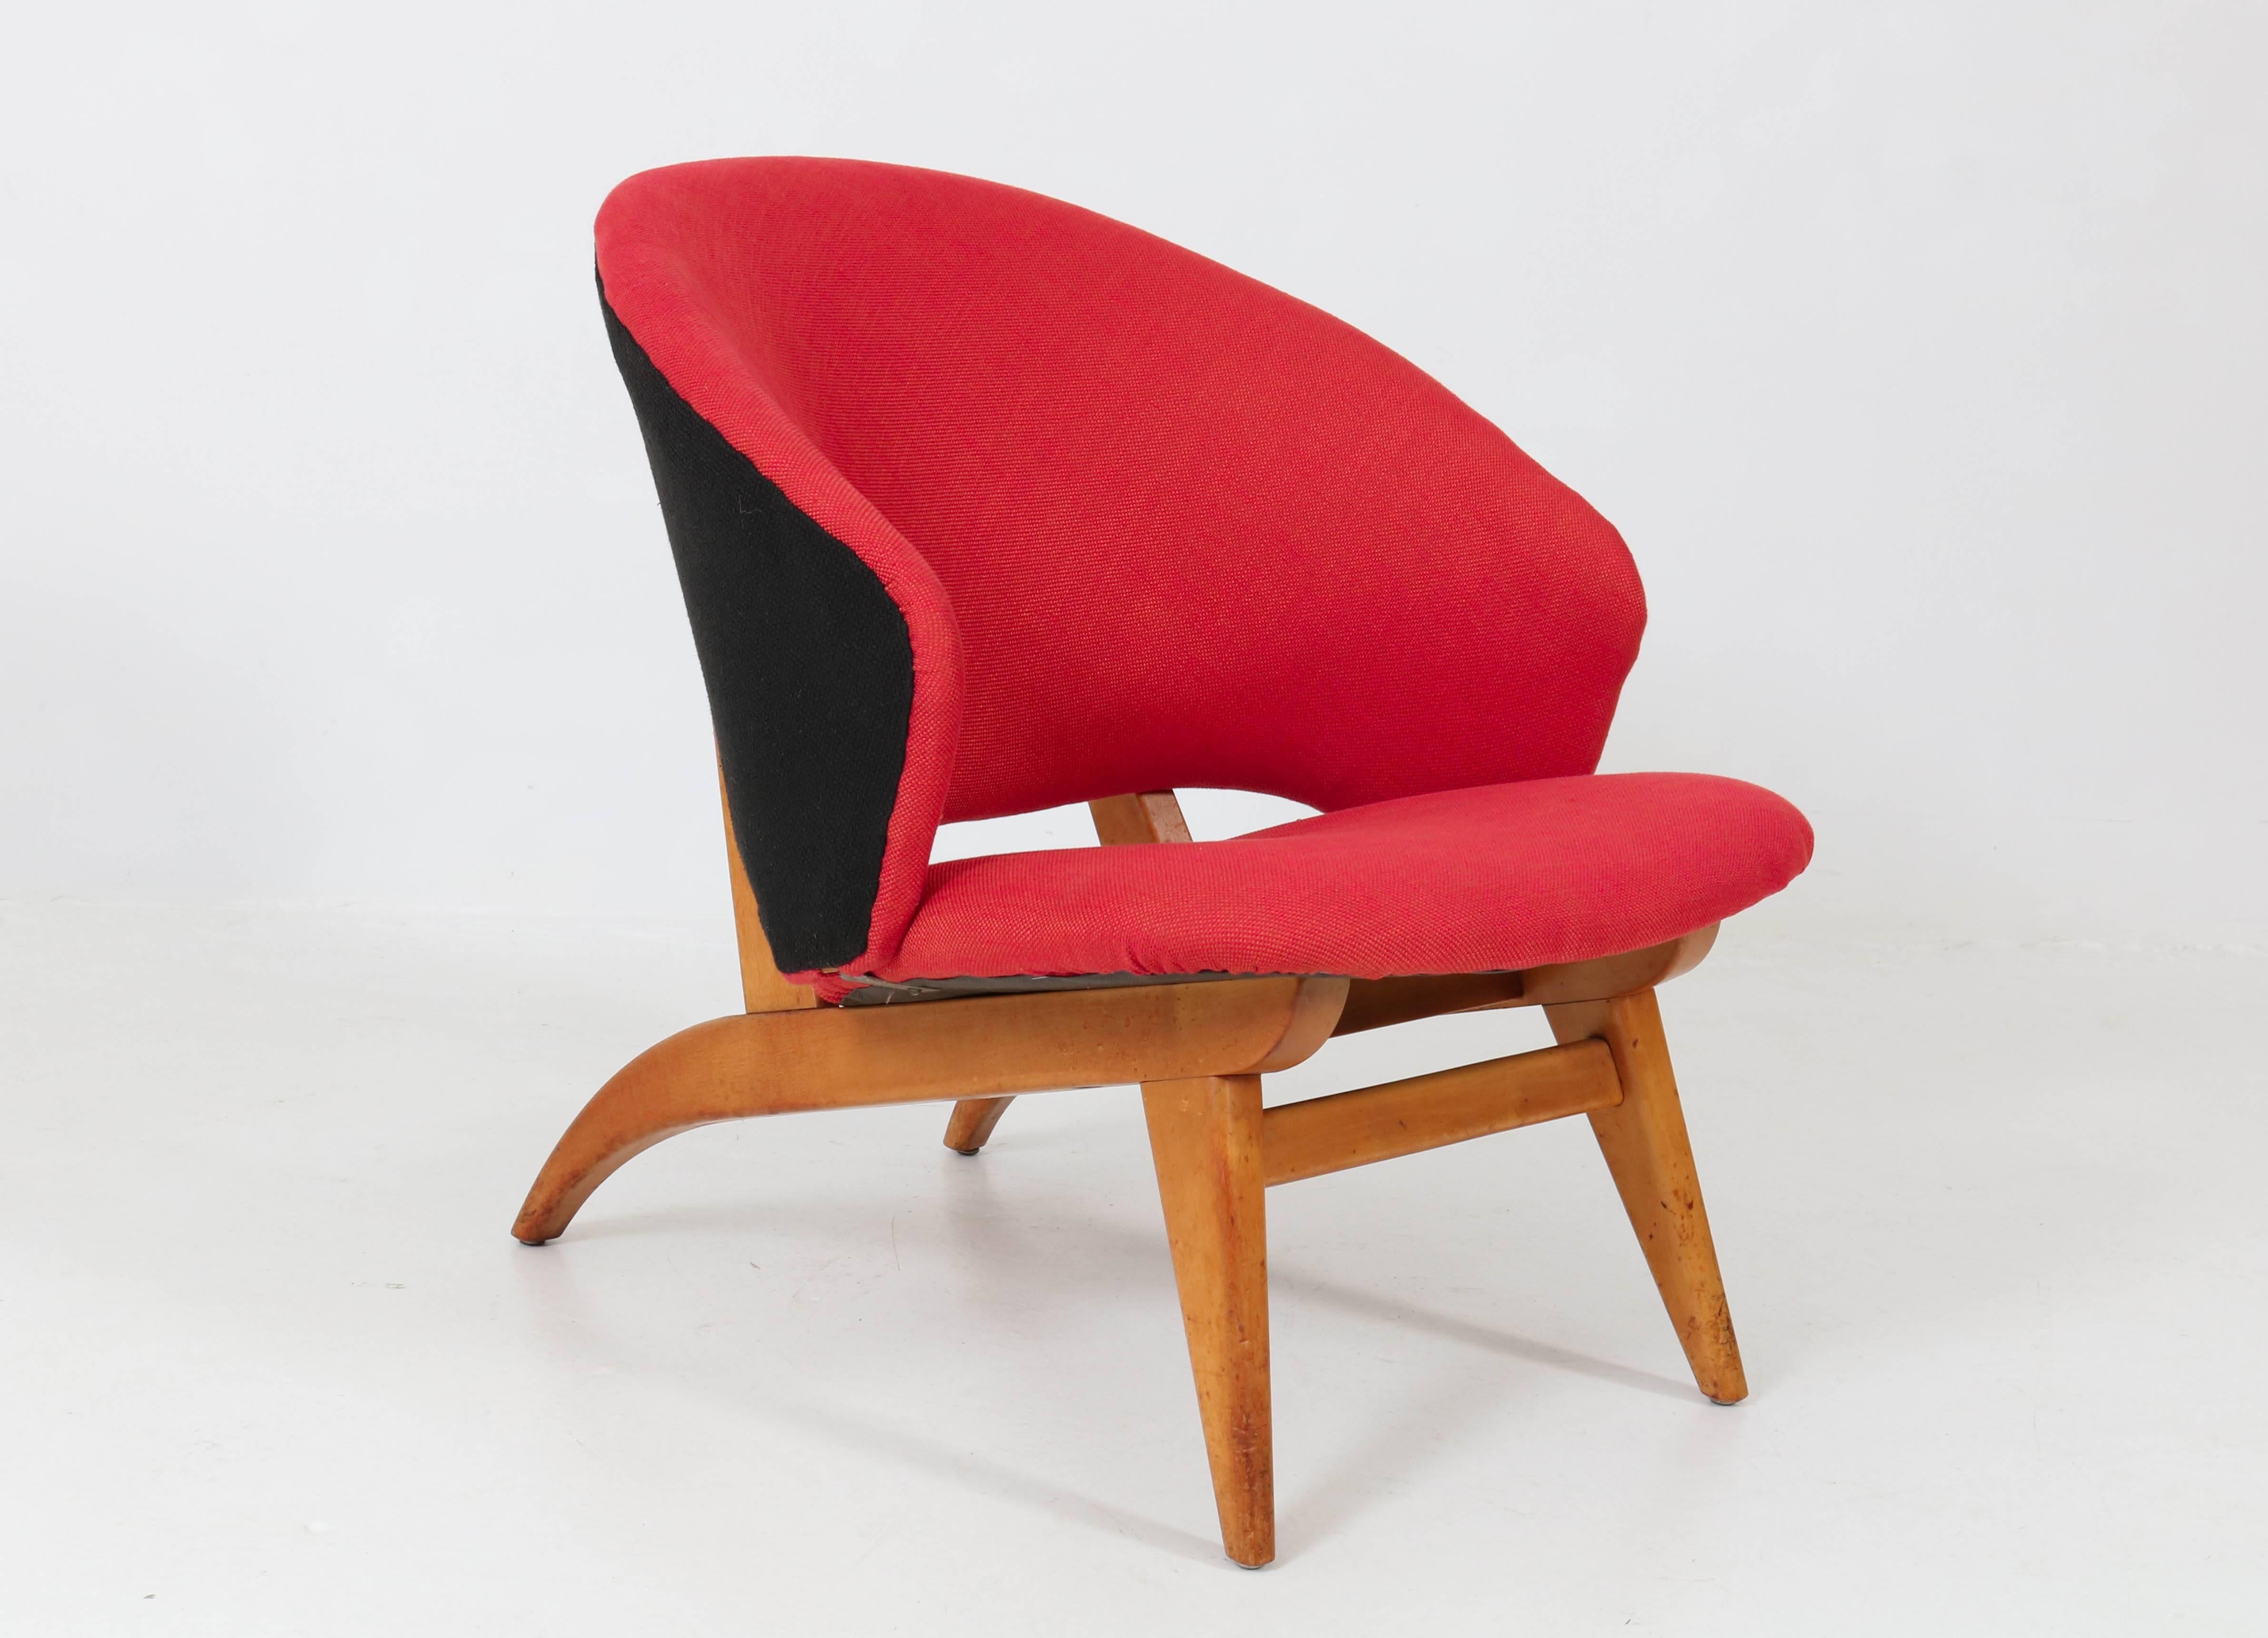 Mid-Century Modern lounge chair by Theo Ruth for Artifort.
Striking Dutch design from the 1950s.
Beech frame and re-upholstered with quality Italian fabric.
Illustrated in Taschen 1950s decorative art, Charlotte and Peter Feill on page 232
In